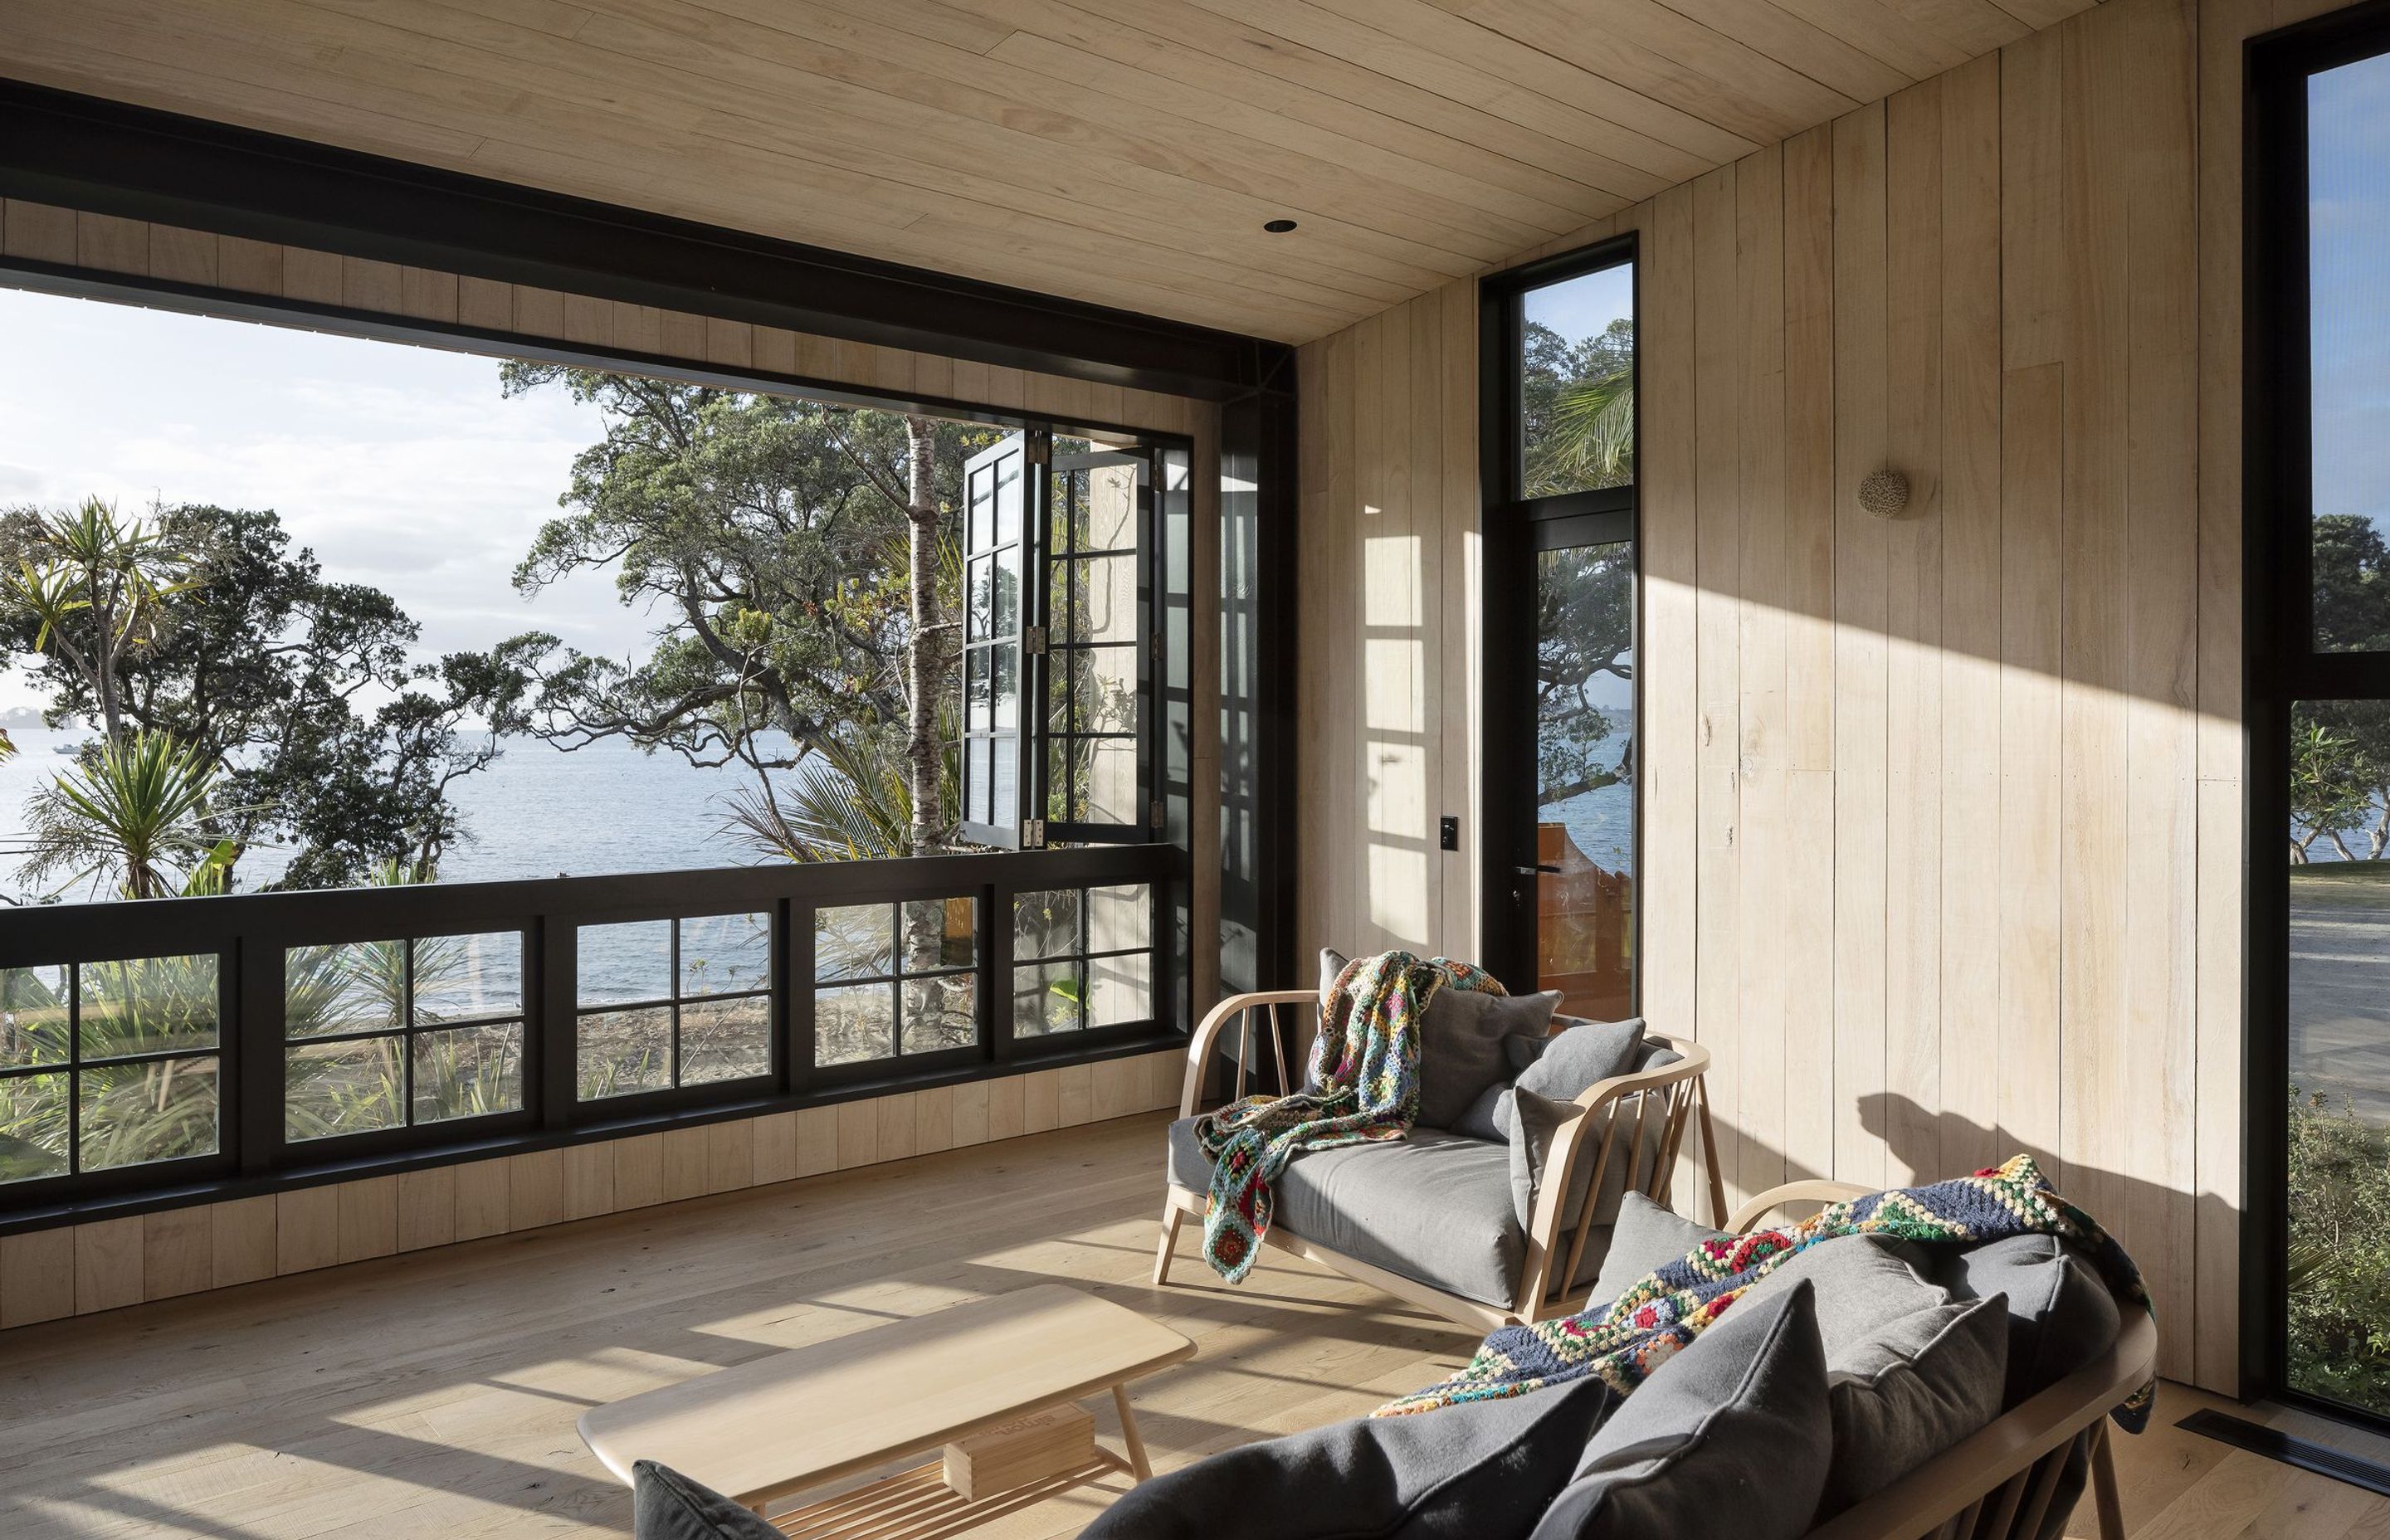 The home's elevation ensures stunning views as well as climate resilience.